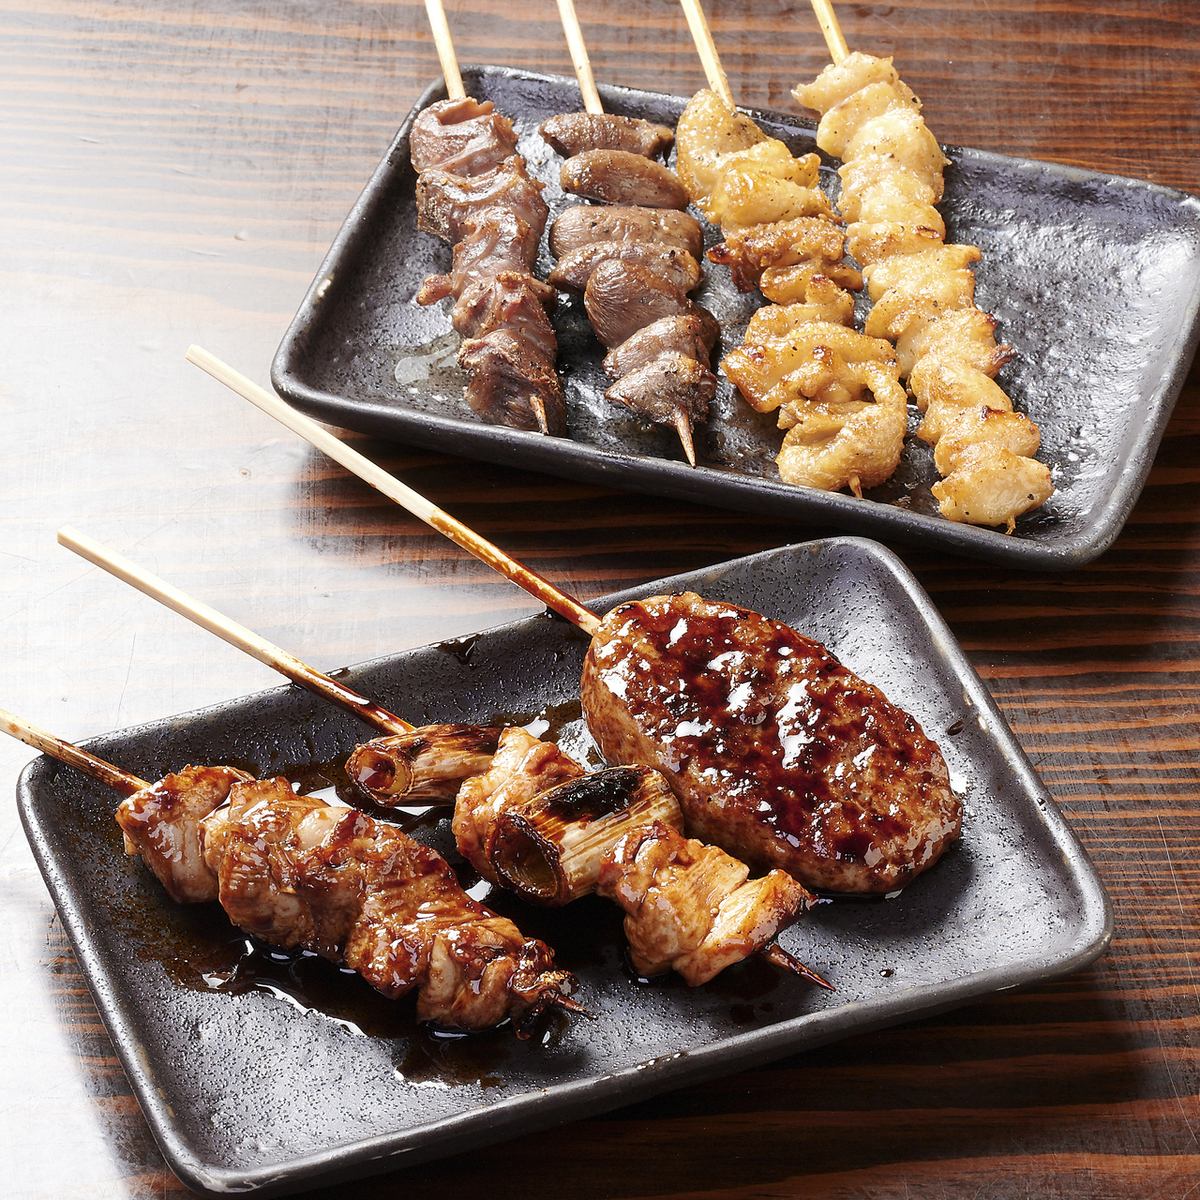 [Exquisite!] The skewers made with fresh and high-quality chicken are excellent!